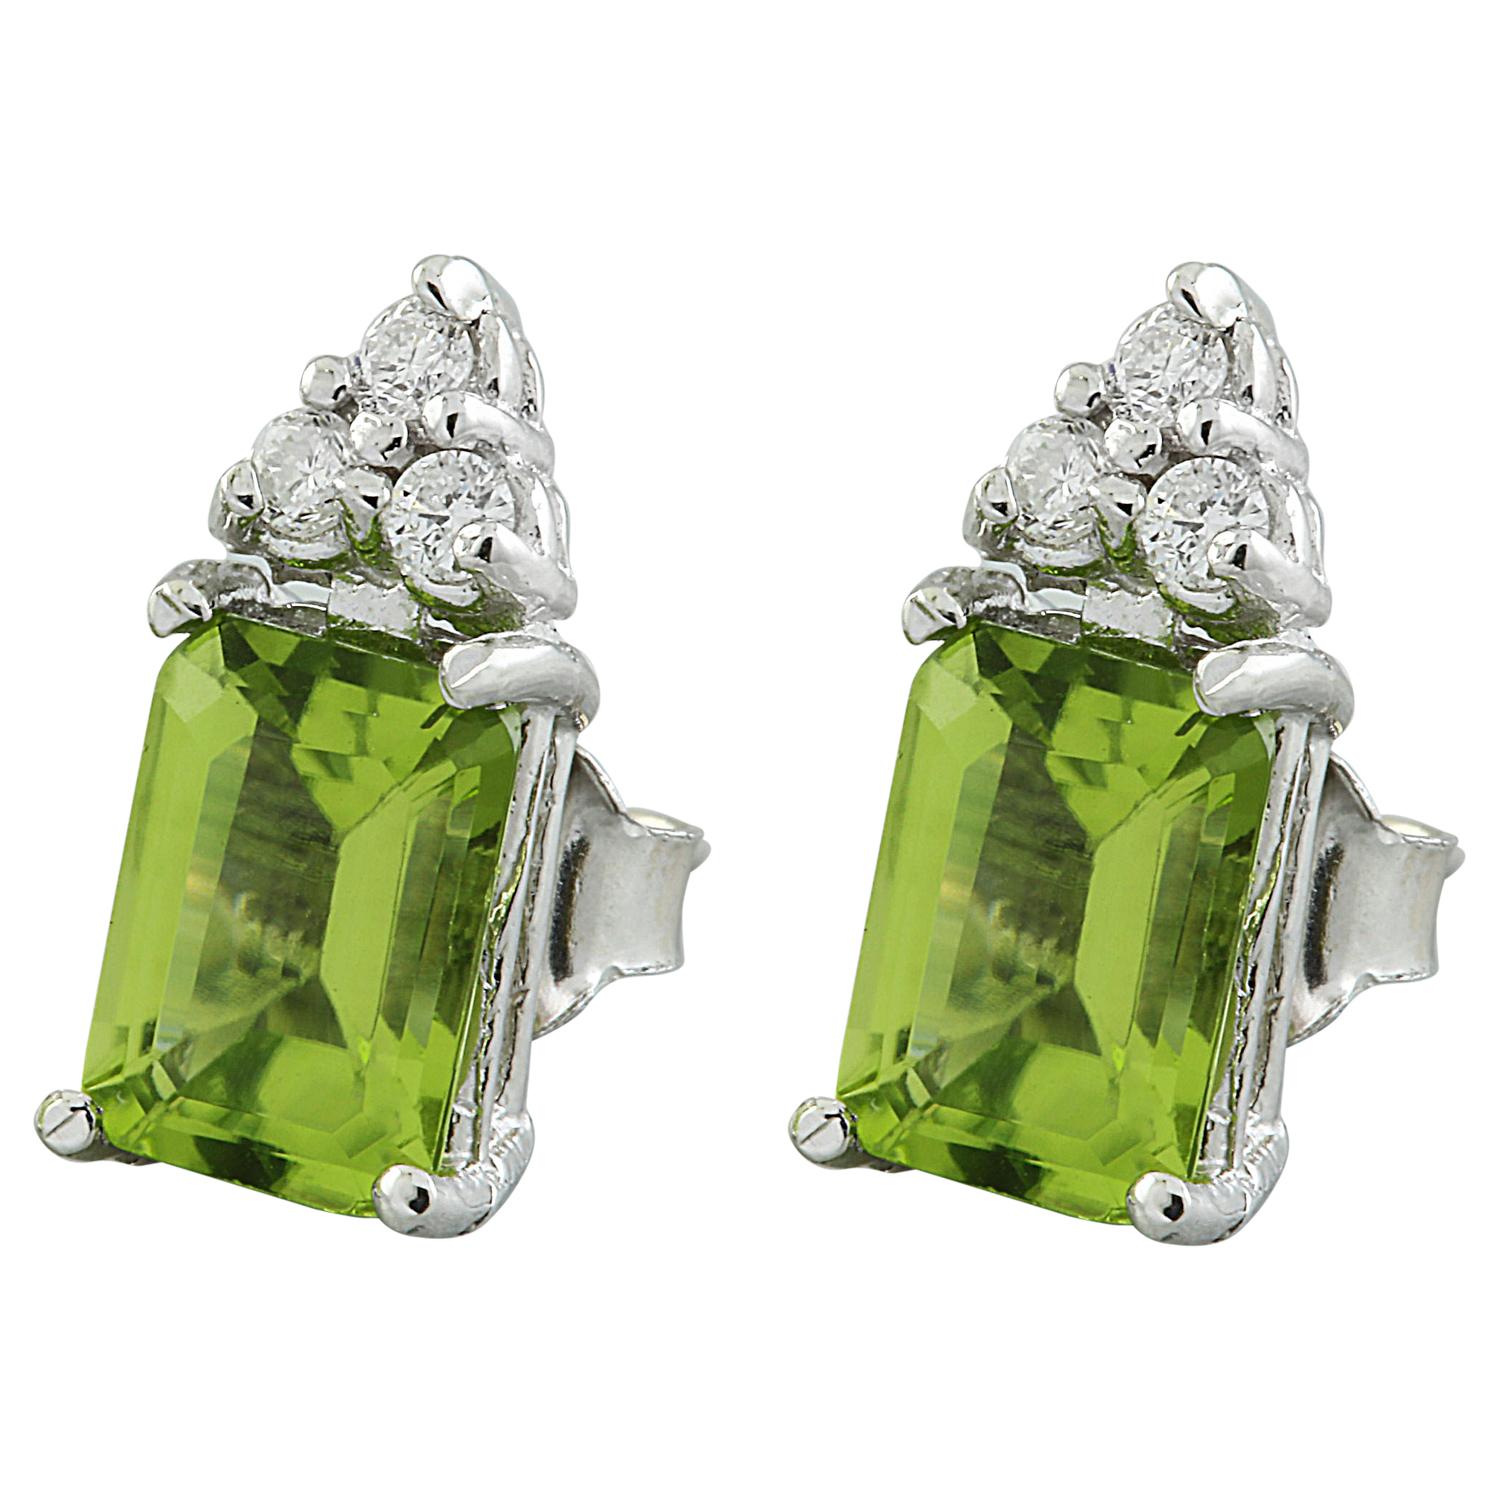 2.65 Carat Natural Peridot 14 Karat Solid White Gold Diamond Earrings
Stamped: 14K 
Total Earrings Weight: 1.5 Grams 
Peridot Weight: 2.50 Carat (7.00x5.00 Millimeters)  
Diamond Weight: 0.15 Carat (F-G Color, VS2-SI1 Clarity )
Face Measures: